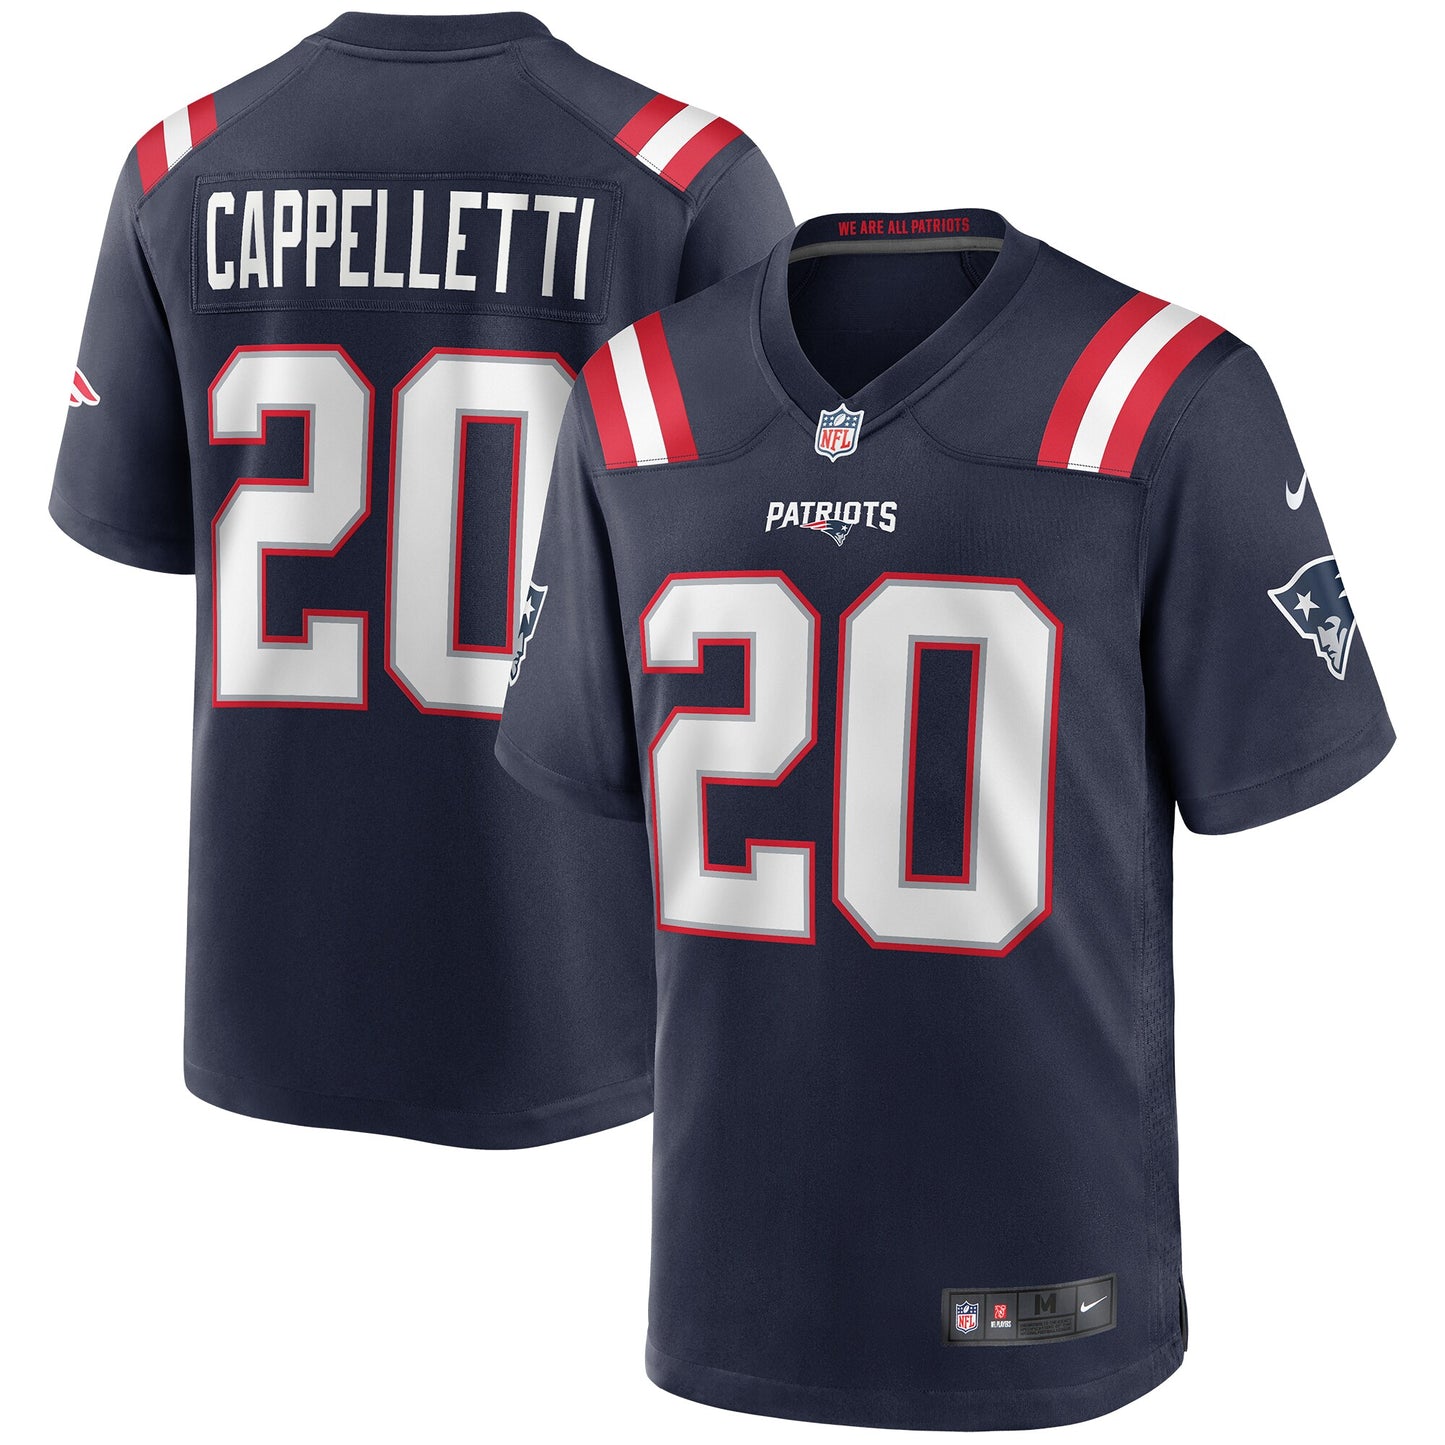 Gino Cappelletti New England Patriots Nike Game Retired Player Jersey - Navy